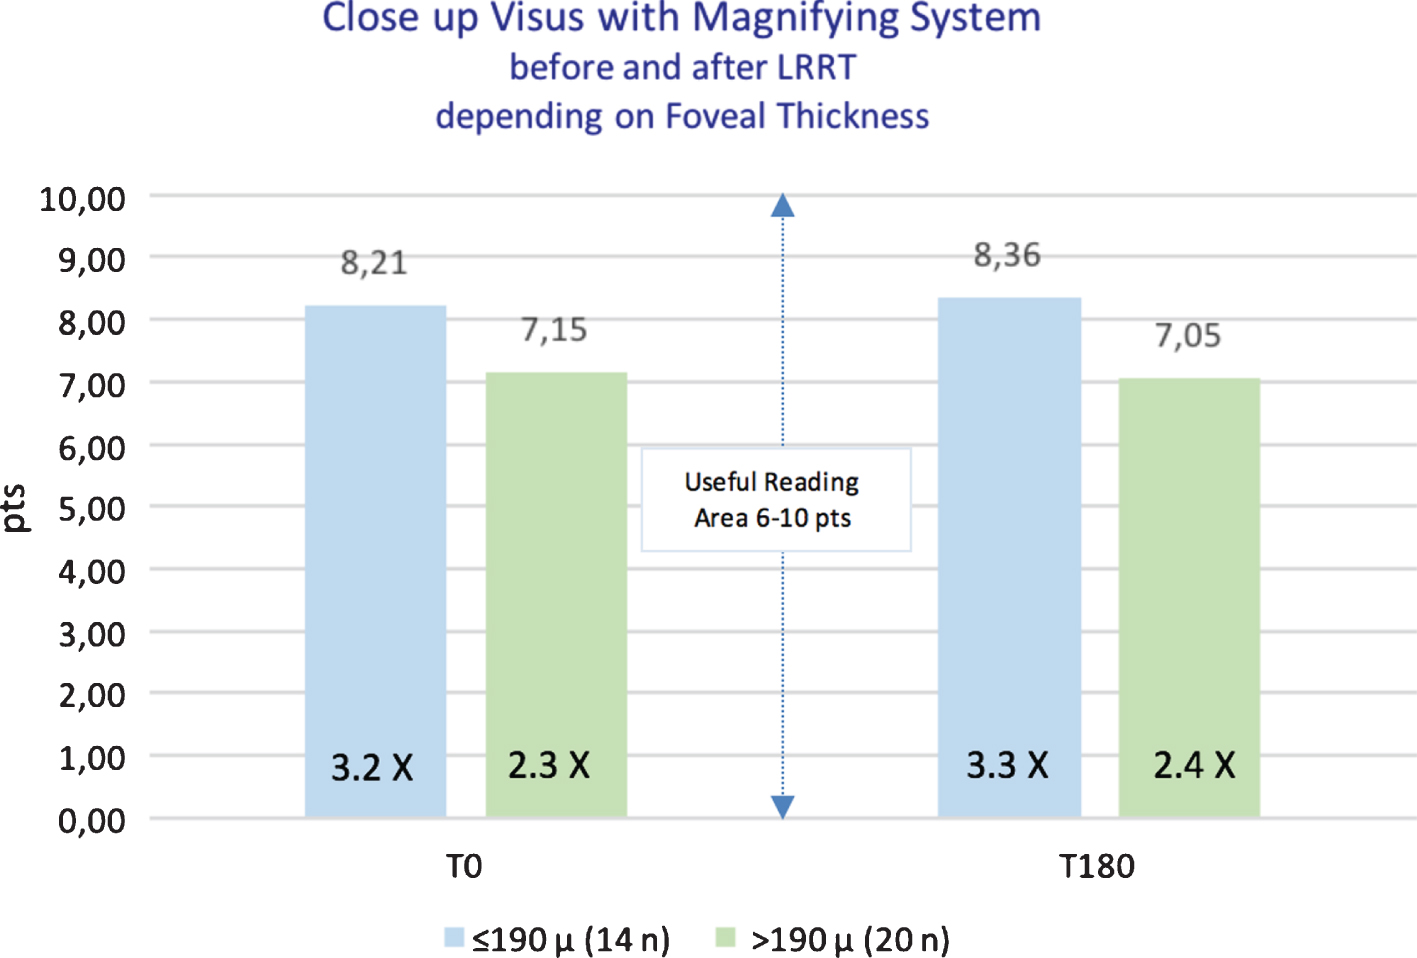 The average threshold of close-up visus with magnifying system did not show a statistically significant change after cell surgery.